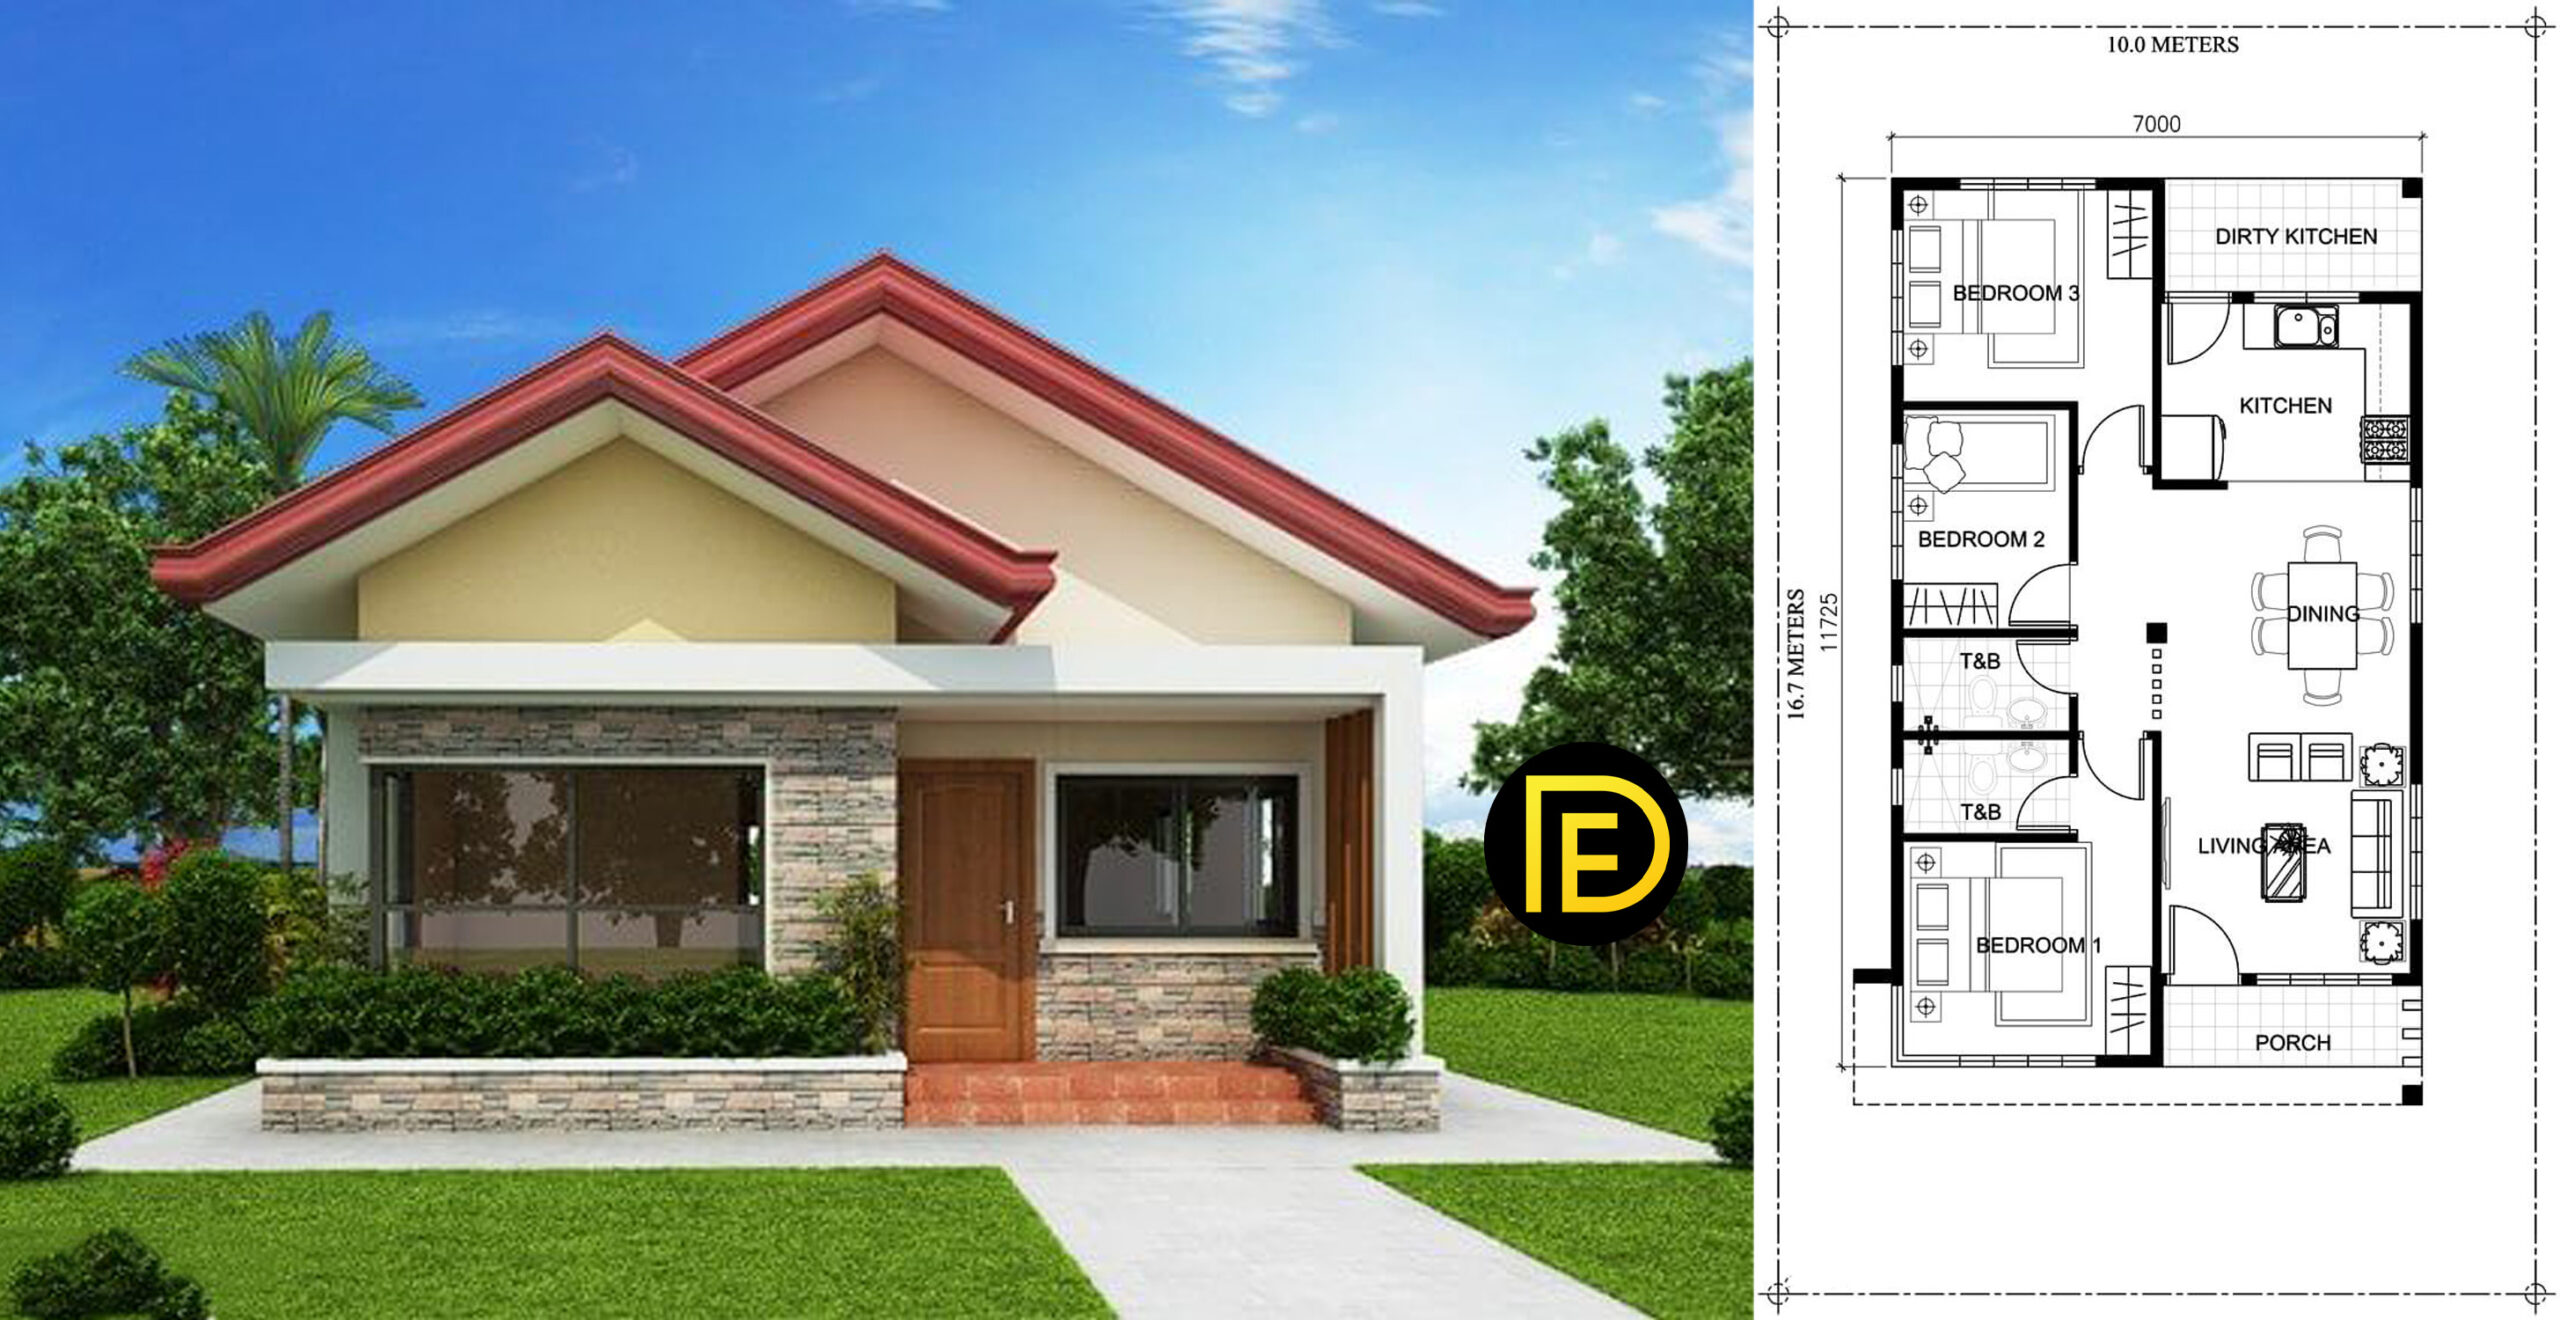 Simple And Elegant Small House Design With 3 Bedrooms And 2 Bathrooms 264